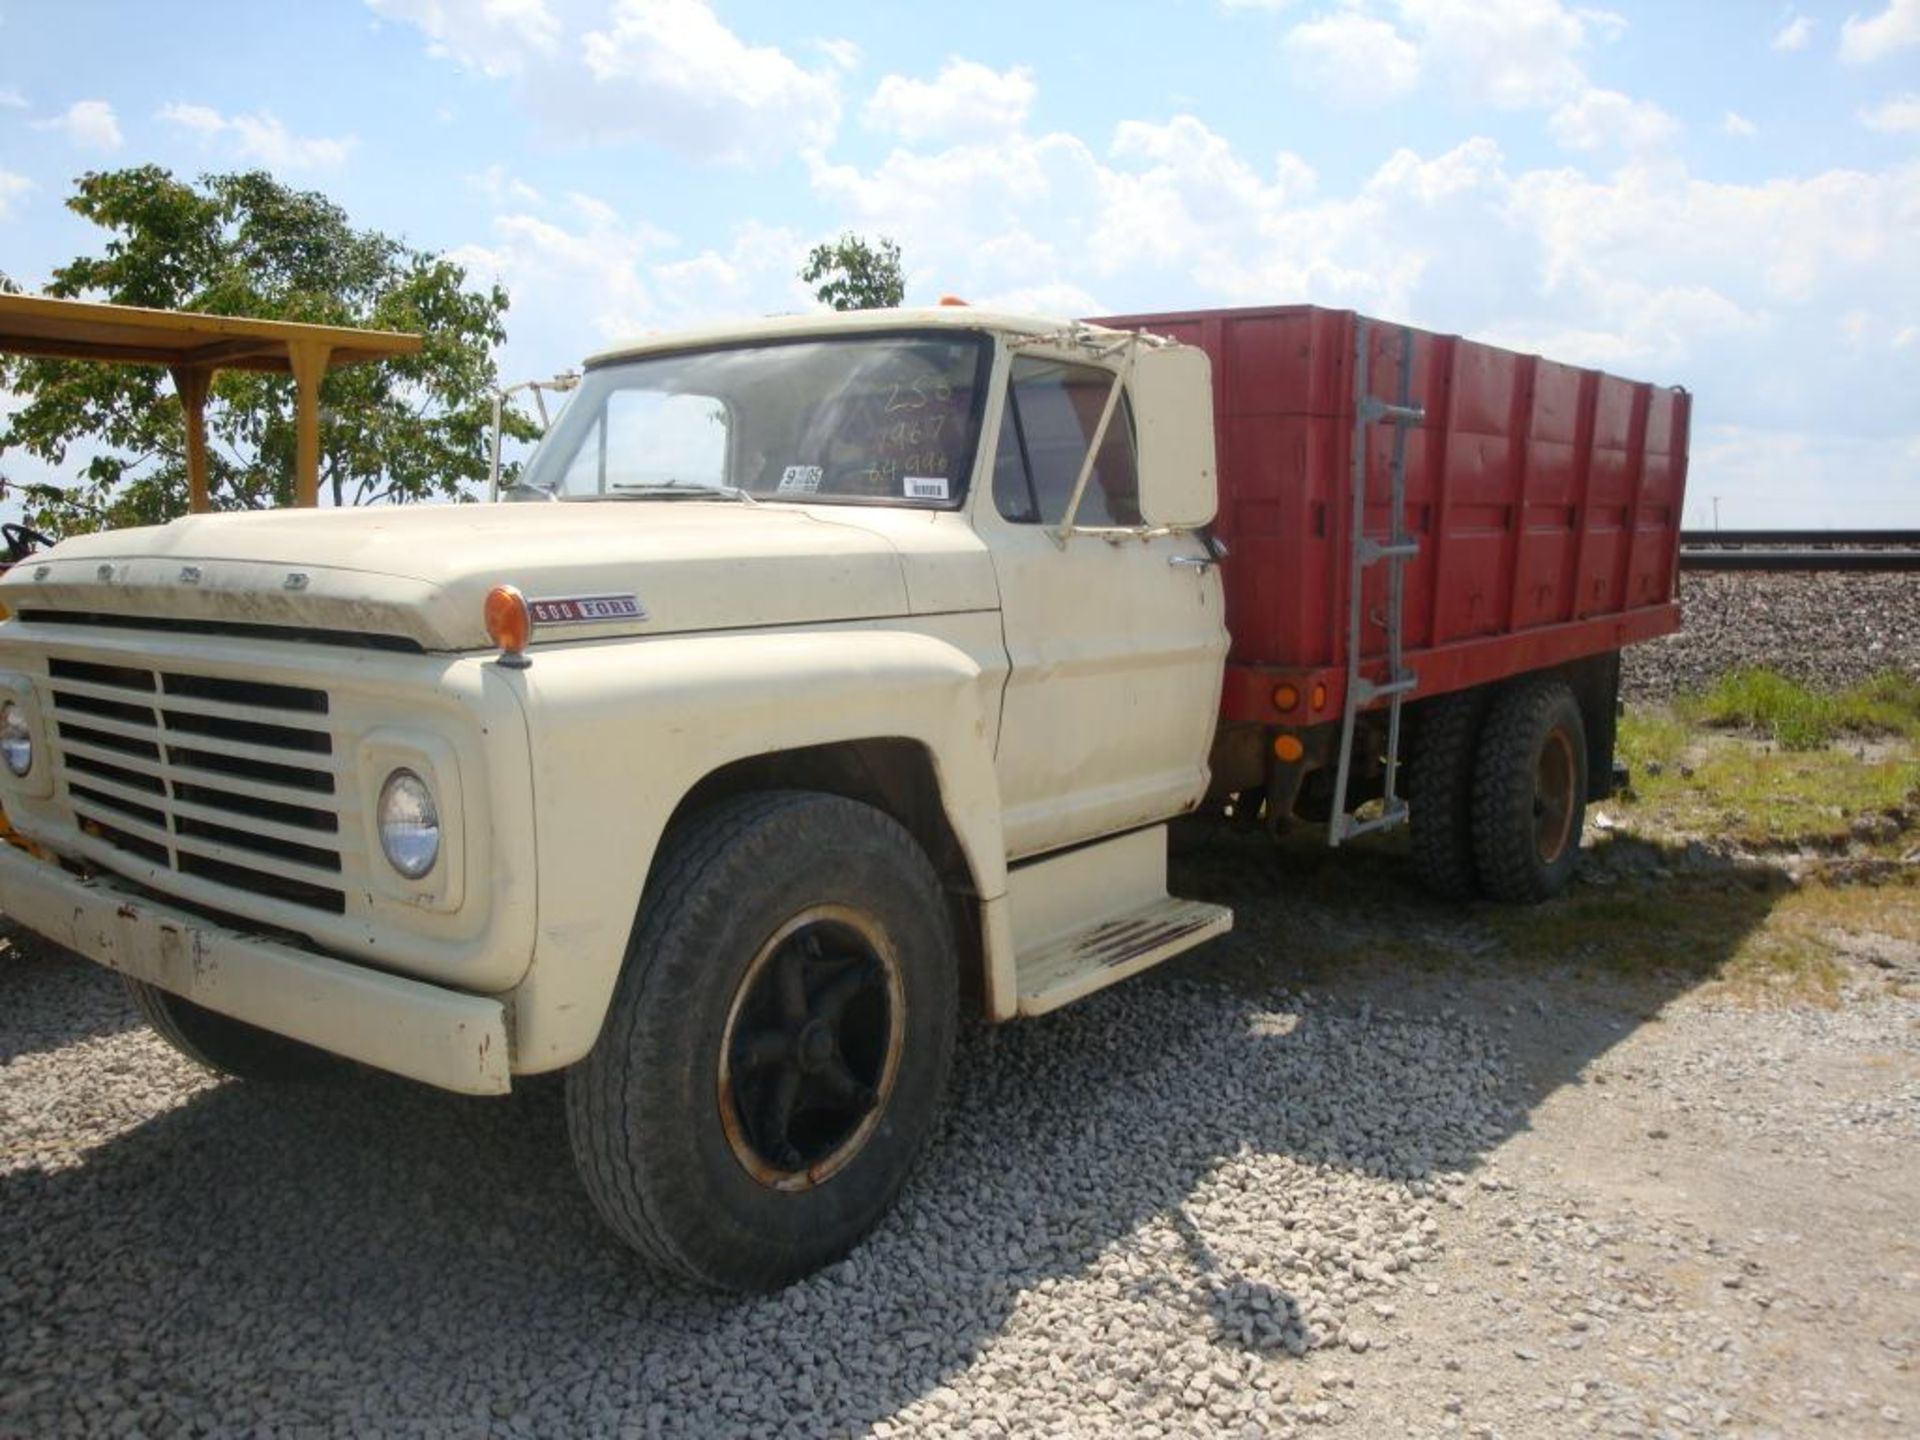 (Title) 1967 Ford 600 grain truck,dump bed, 84,966 miles, gas, good tires - Image 2 of 4